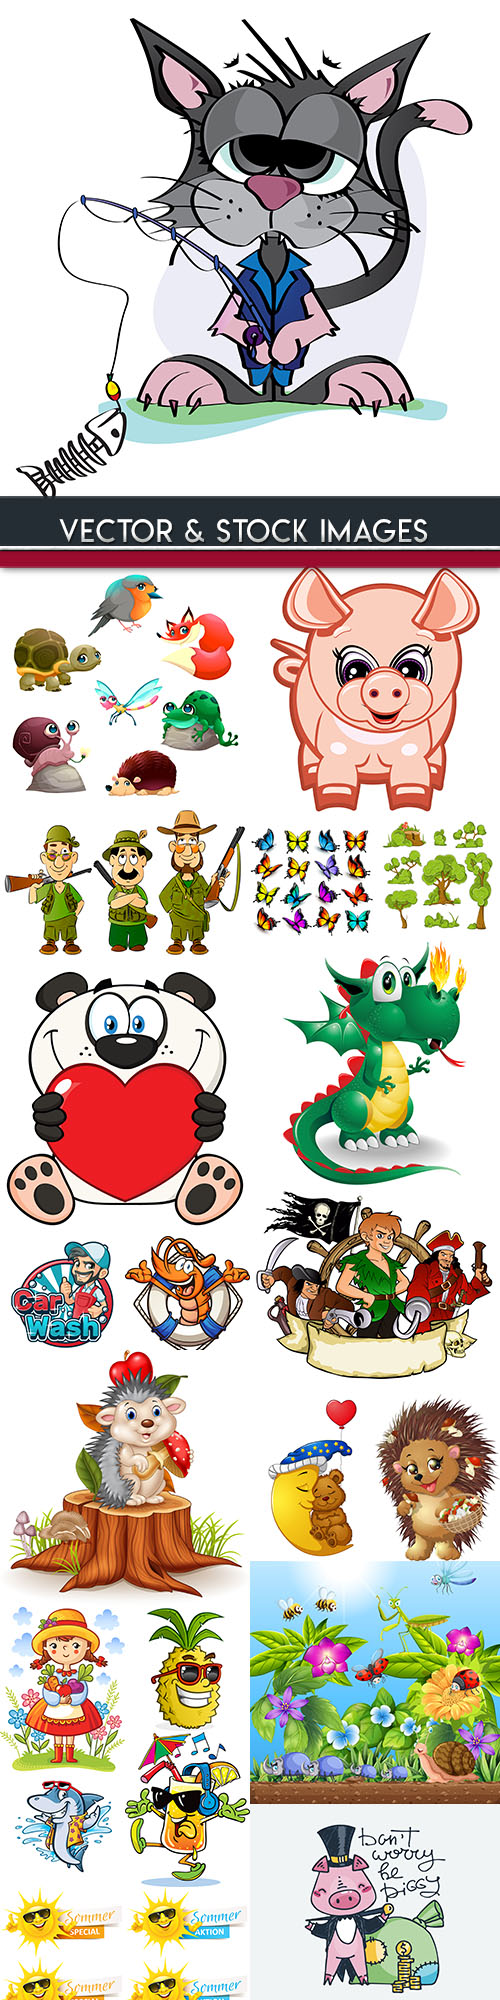 Cartoon amusing characters collection illustrations 6